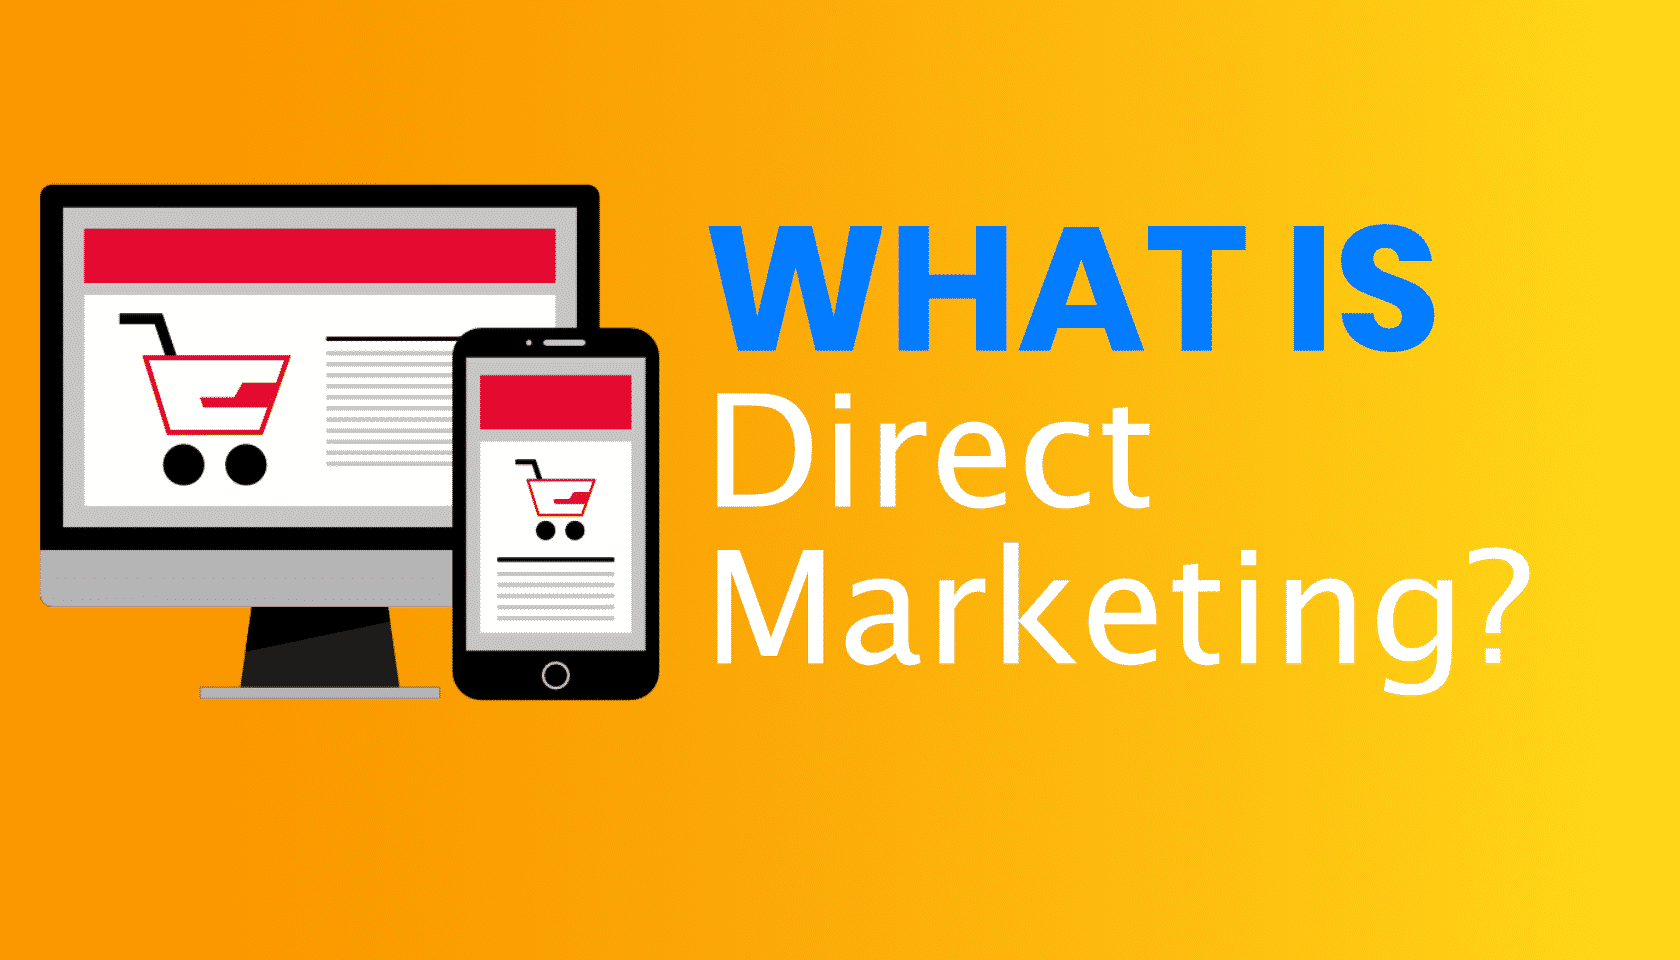 What is: Direct Marketing